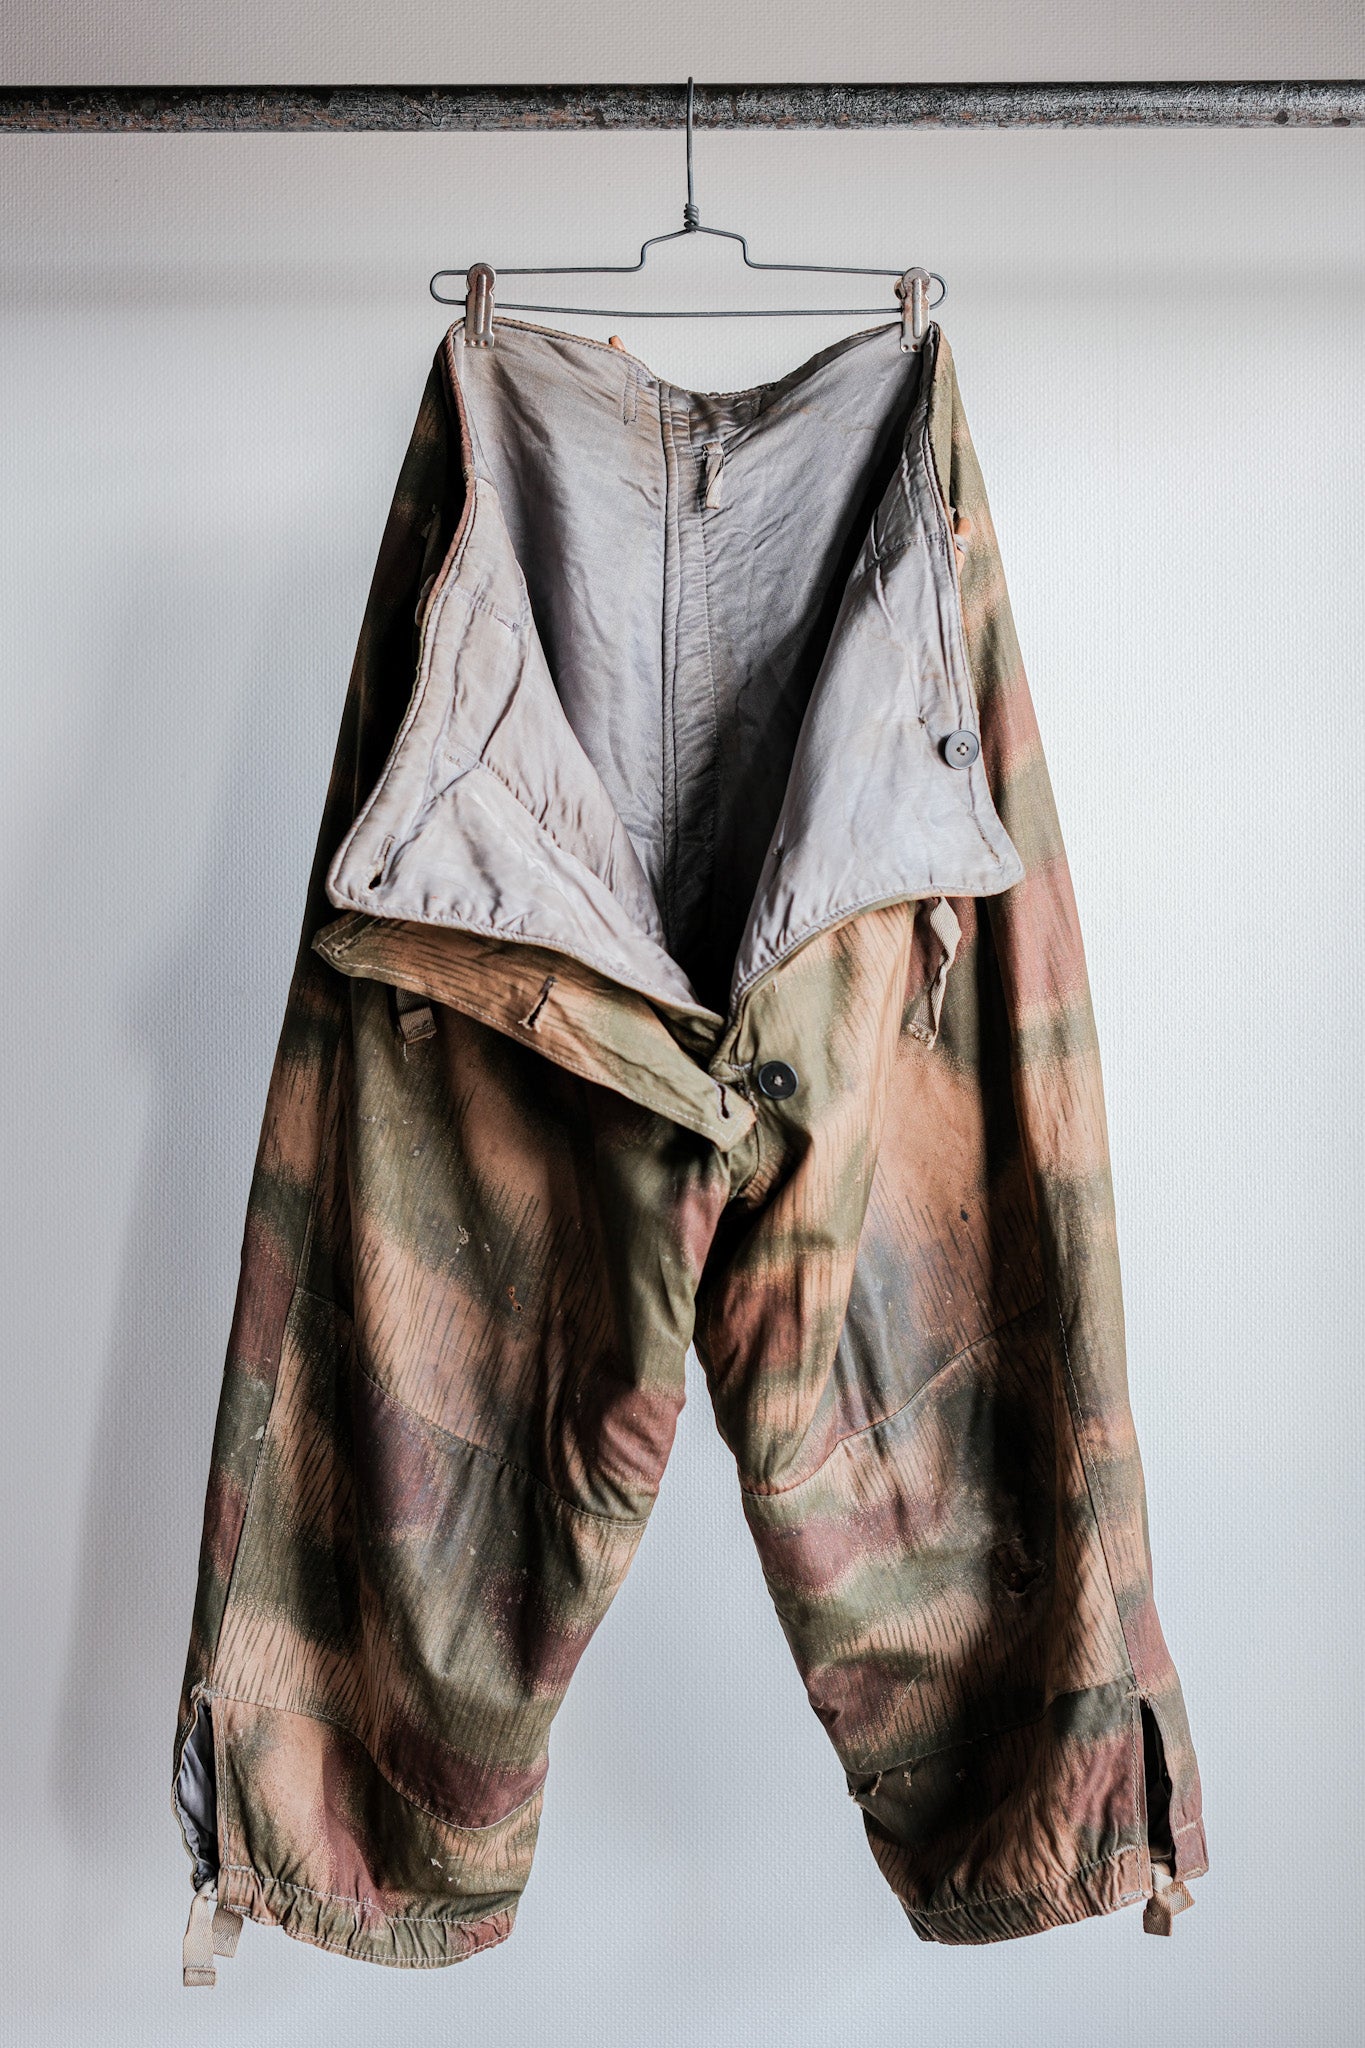 [~ 40's] WWⅱ Army allemand Sumpfternmster 44 Camouflage 43 pantalon d'hiver motif "wehrmacht"